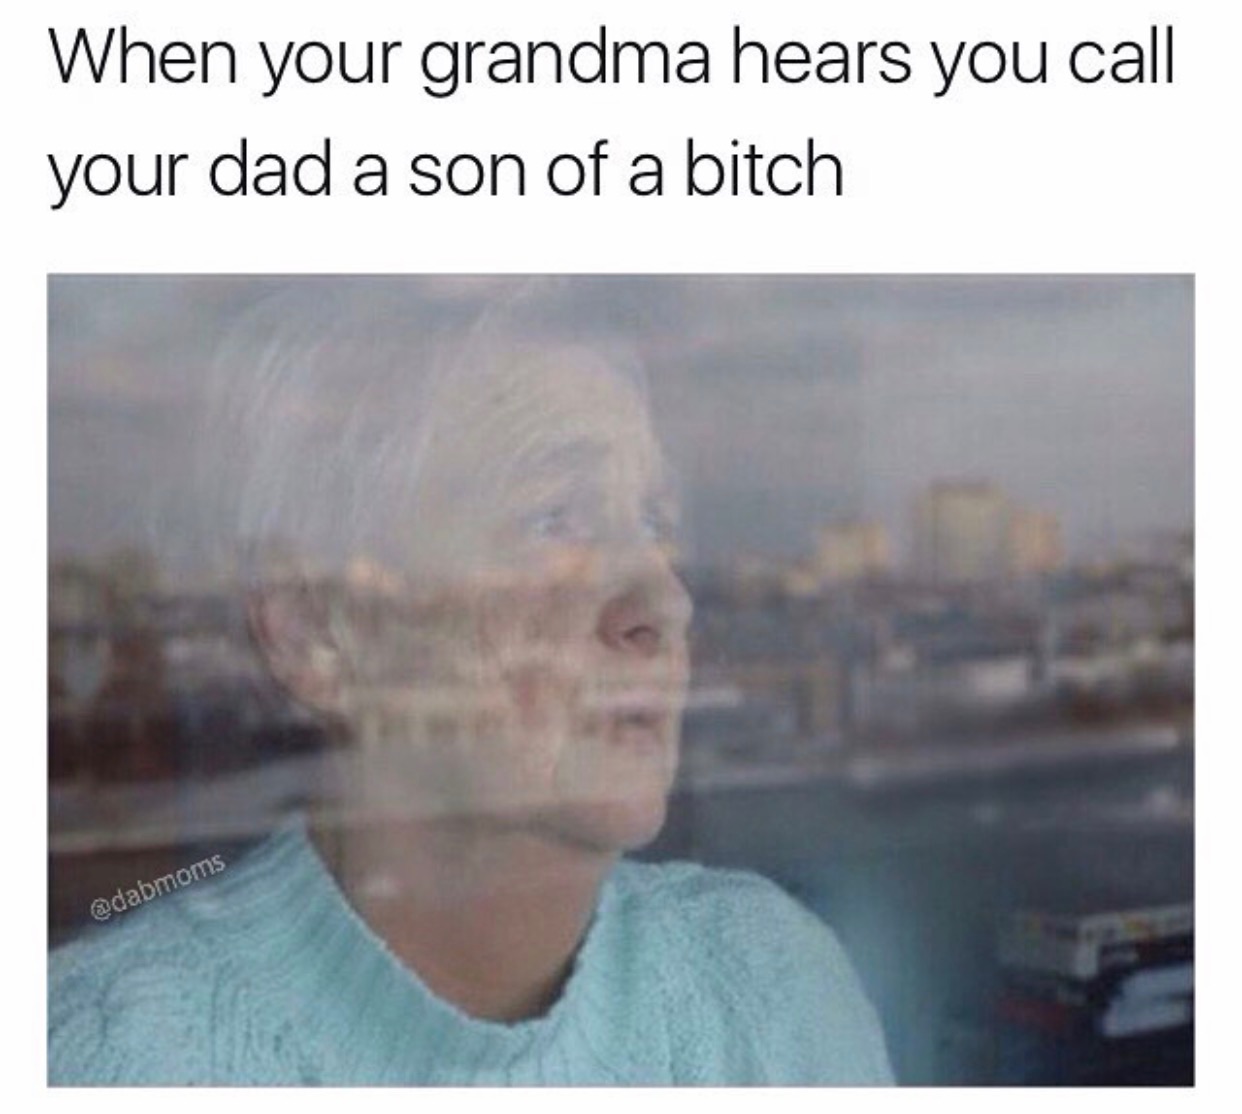 imagine funny - When your grandma hears you call your dad a son of a bitch